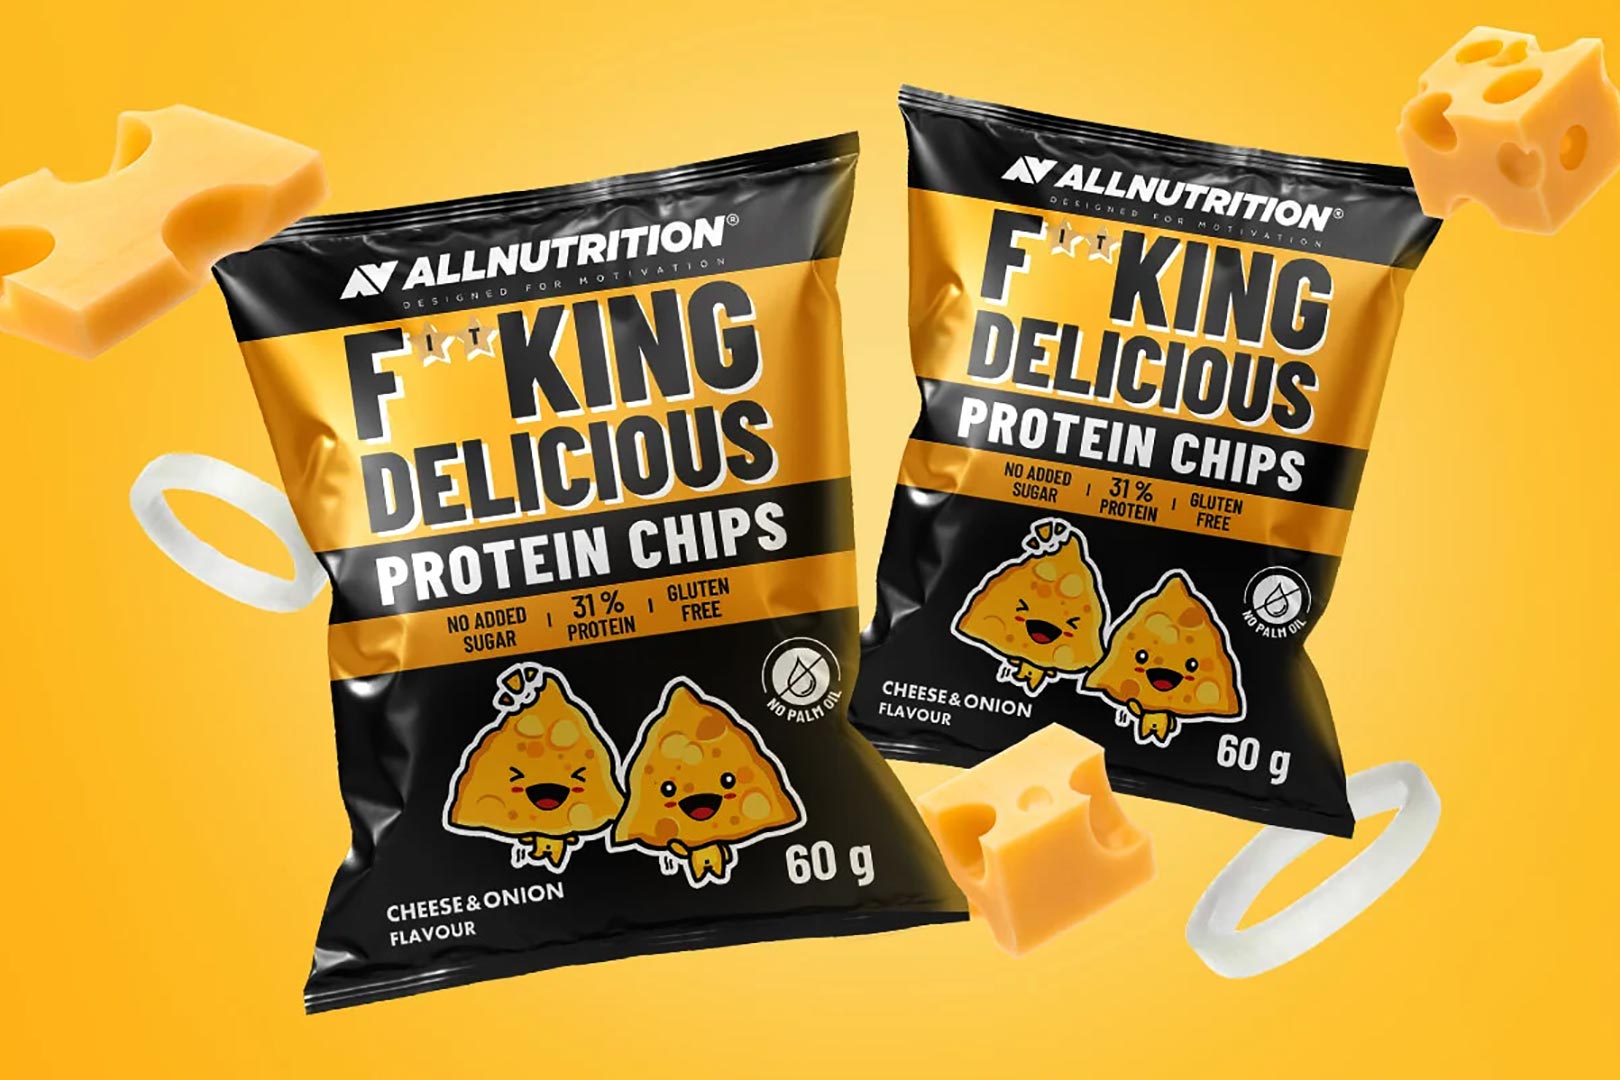 All Nutrition Fking Delicious Protein Chips